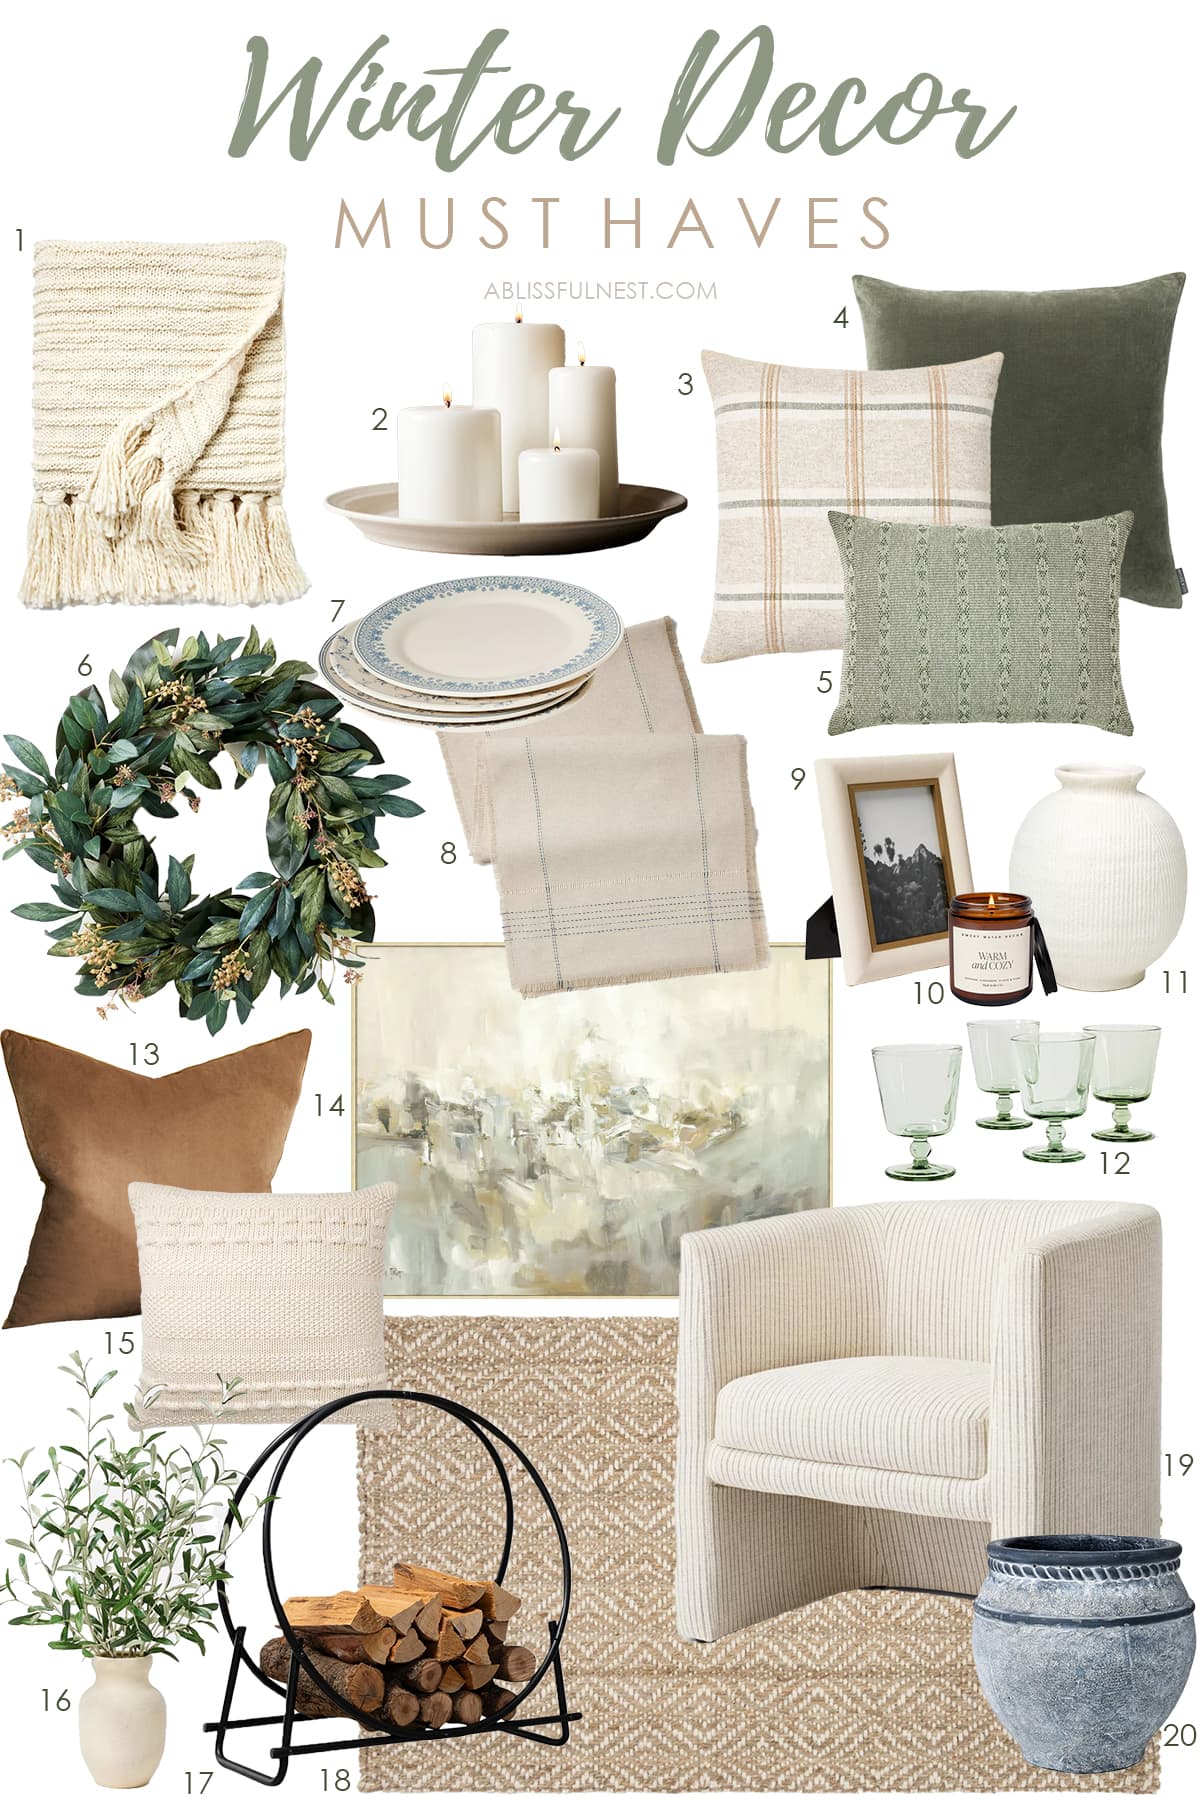 Winter Decor Must Haves